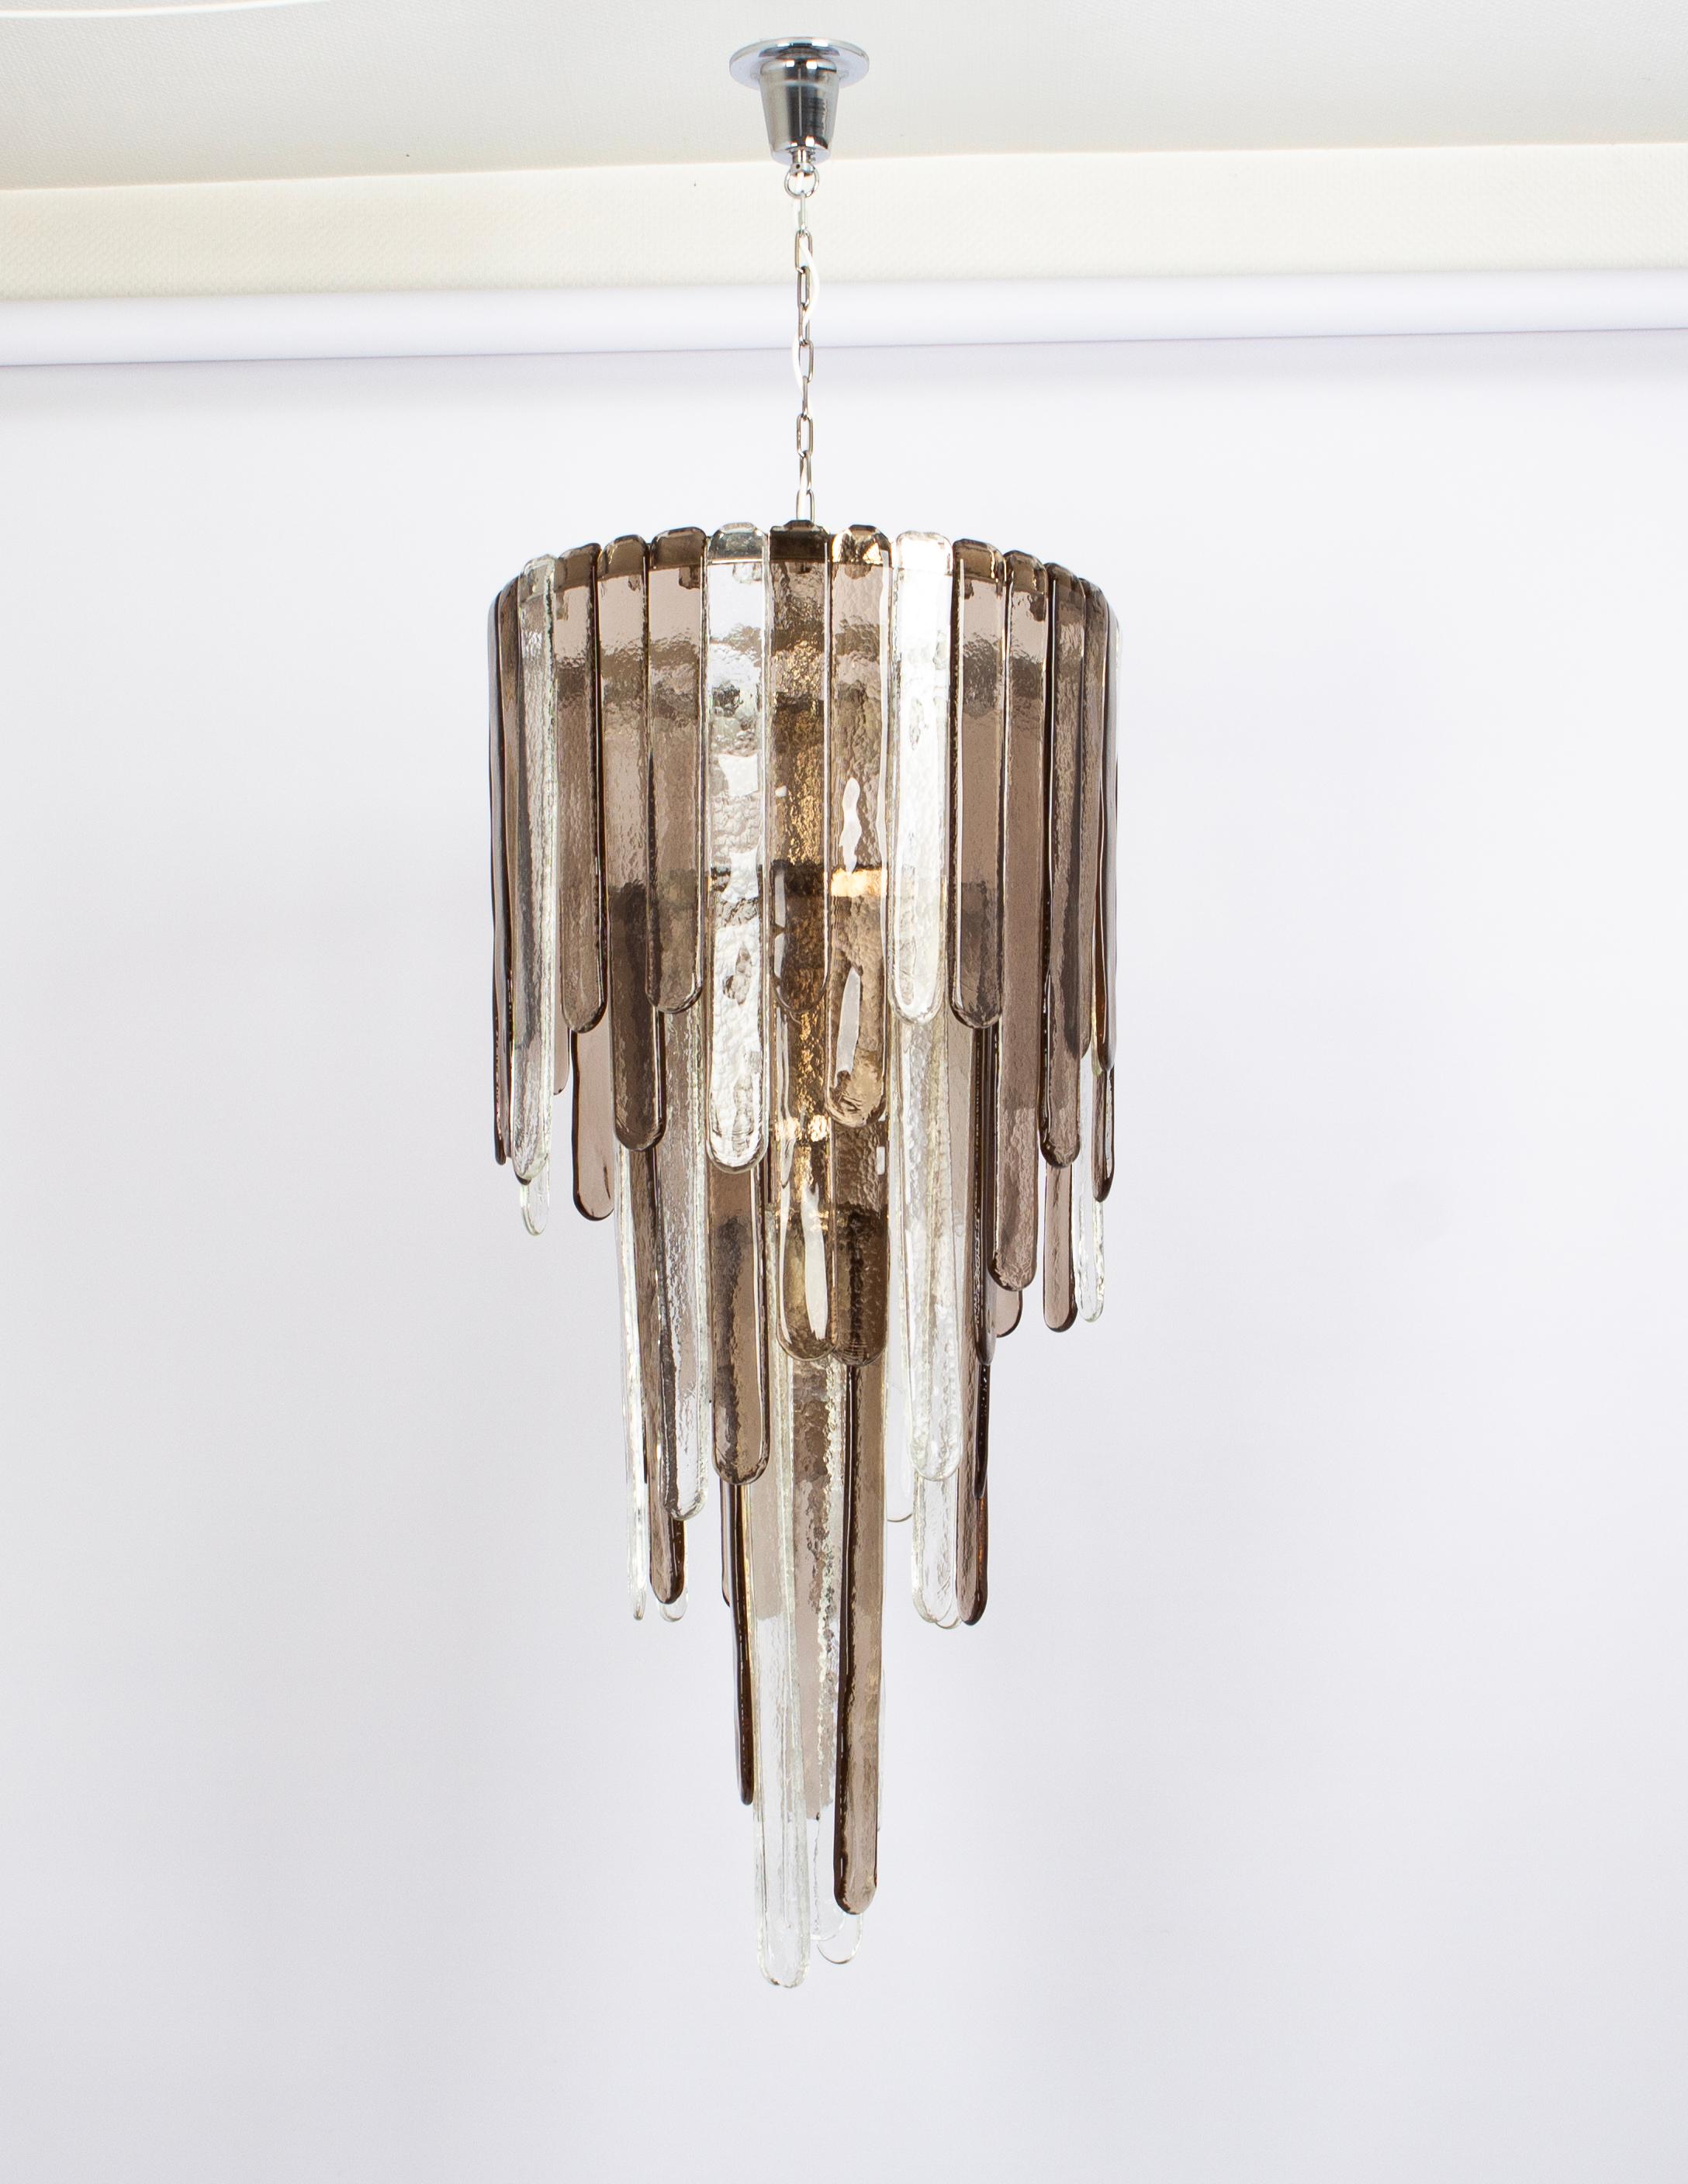 Large Murano Pendant Light Designed by Carlo Nason for Mazzega, Italy 1970s For Sale 2